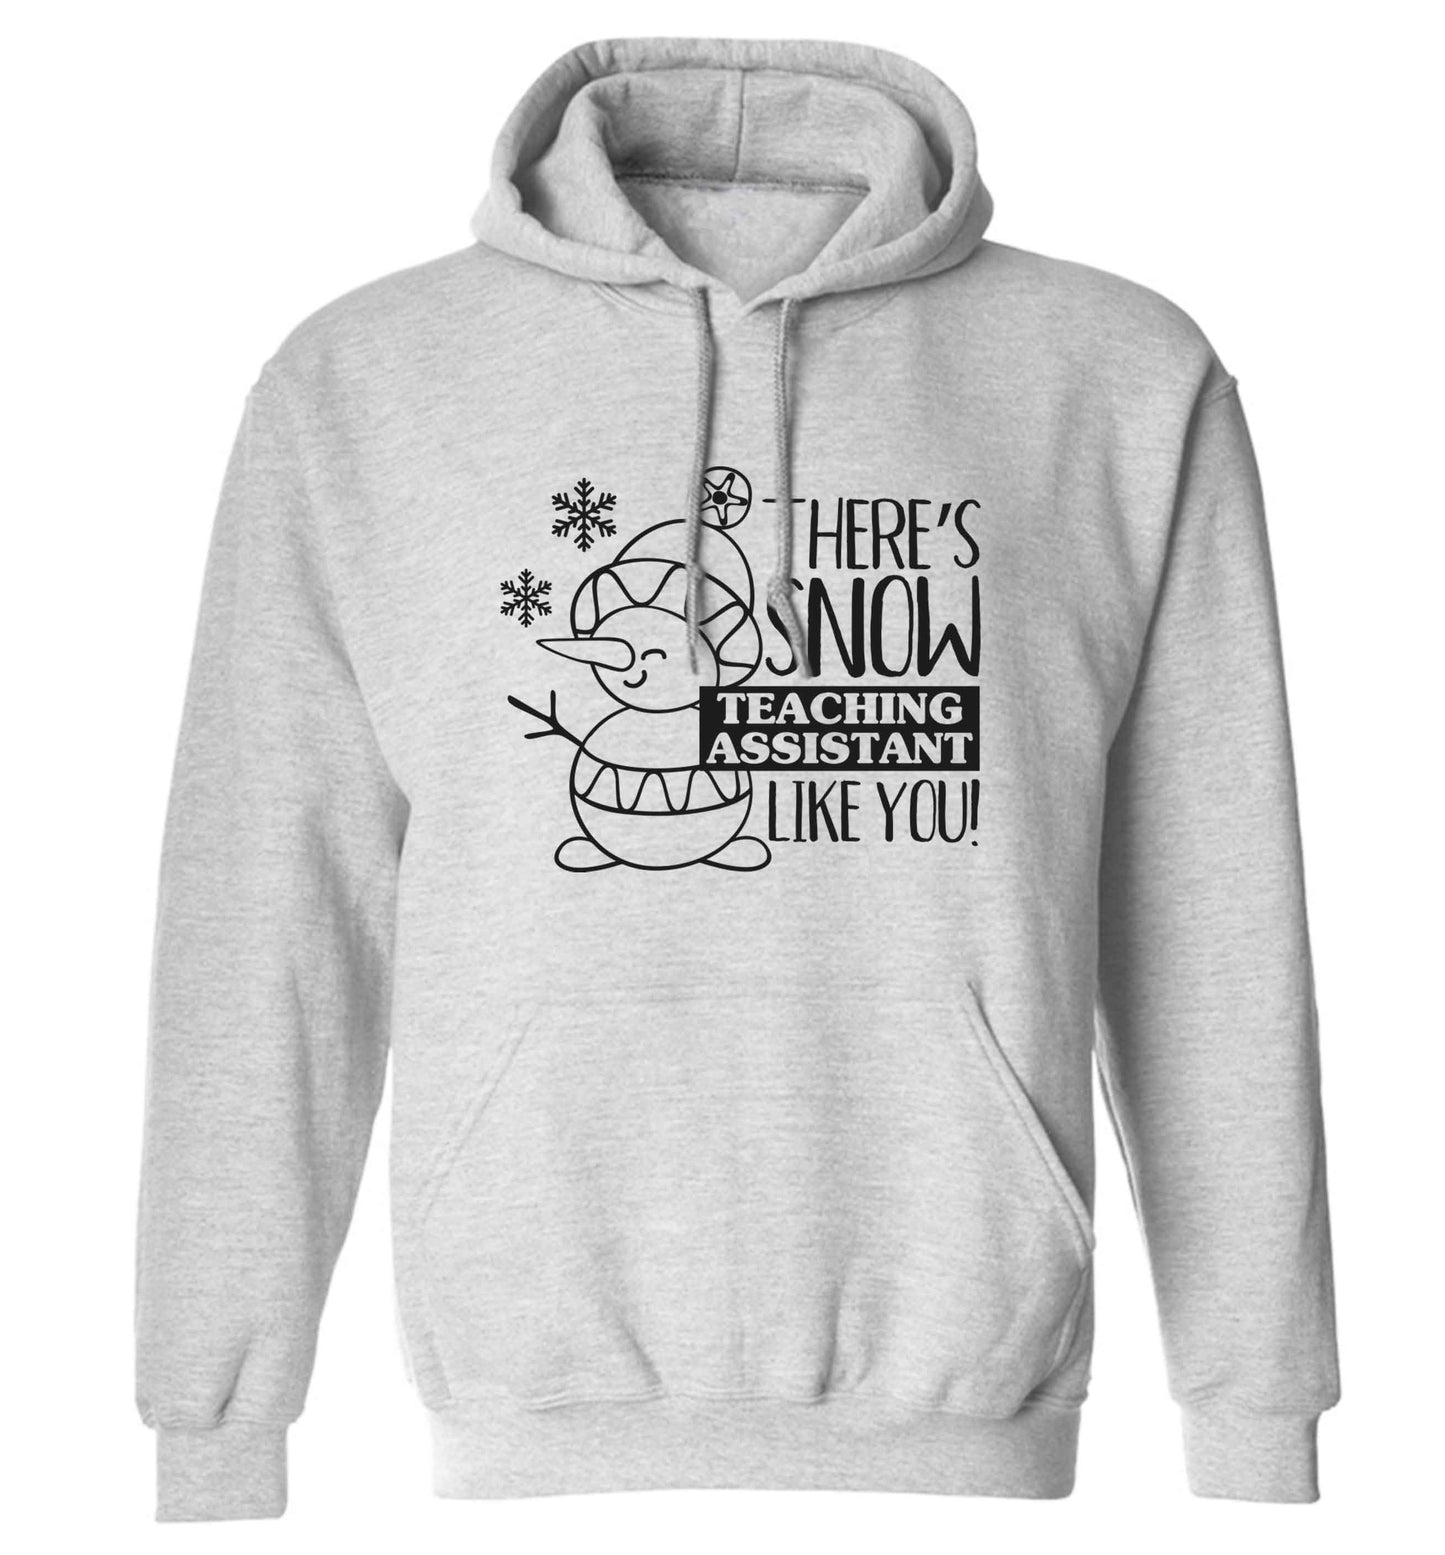 There's snow teaching assistant like you adults unisex grey hoodie 2XL